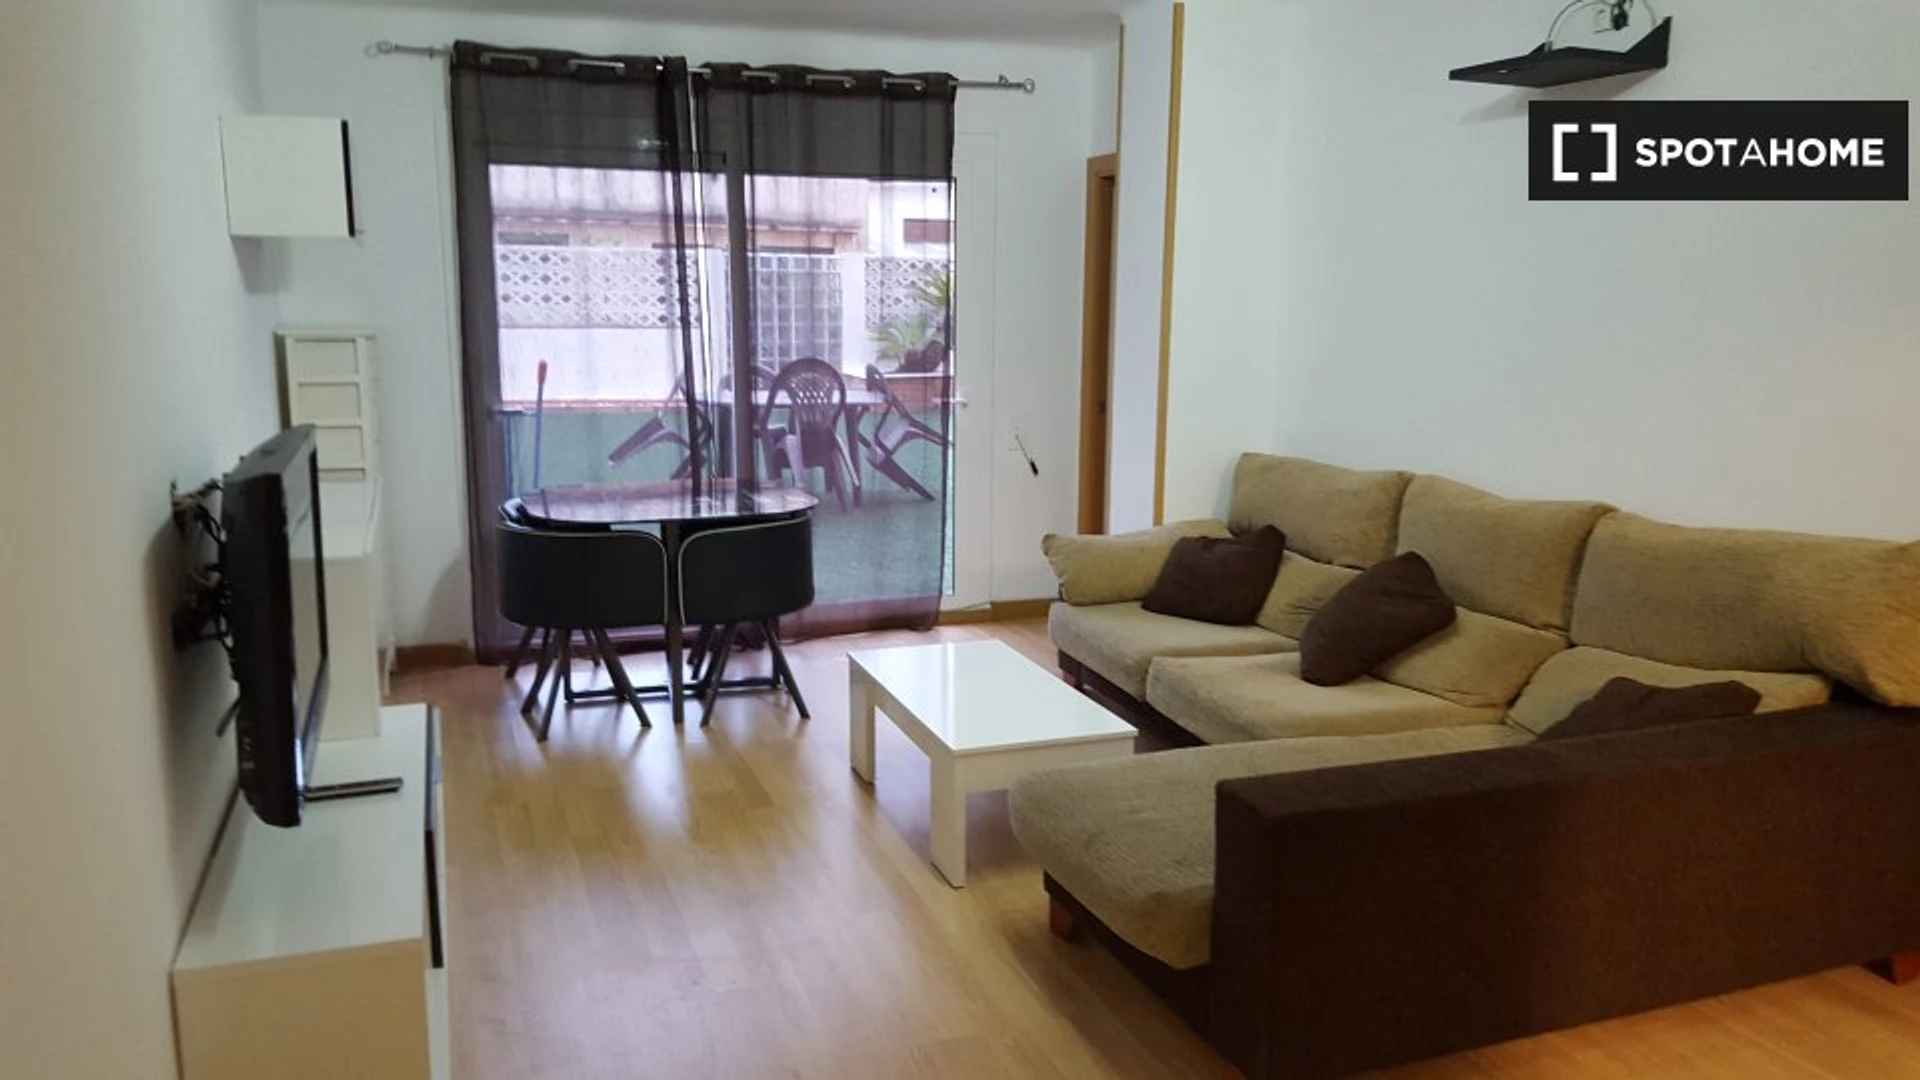 Room for rent with double bed Mataró